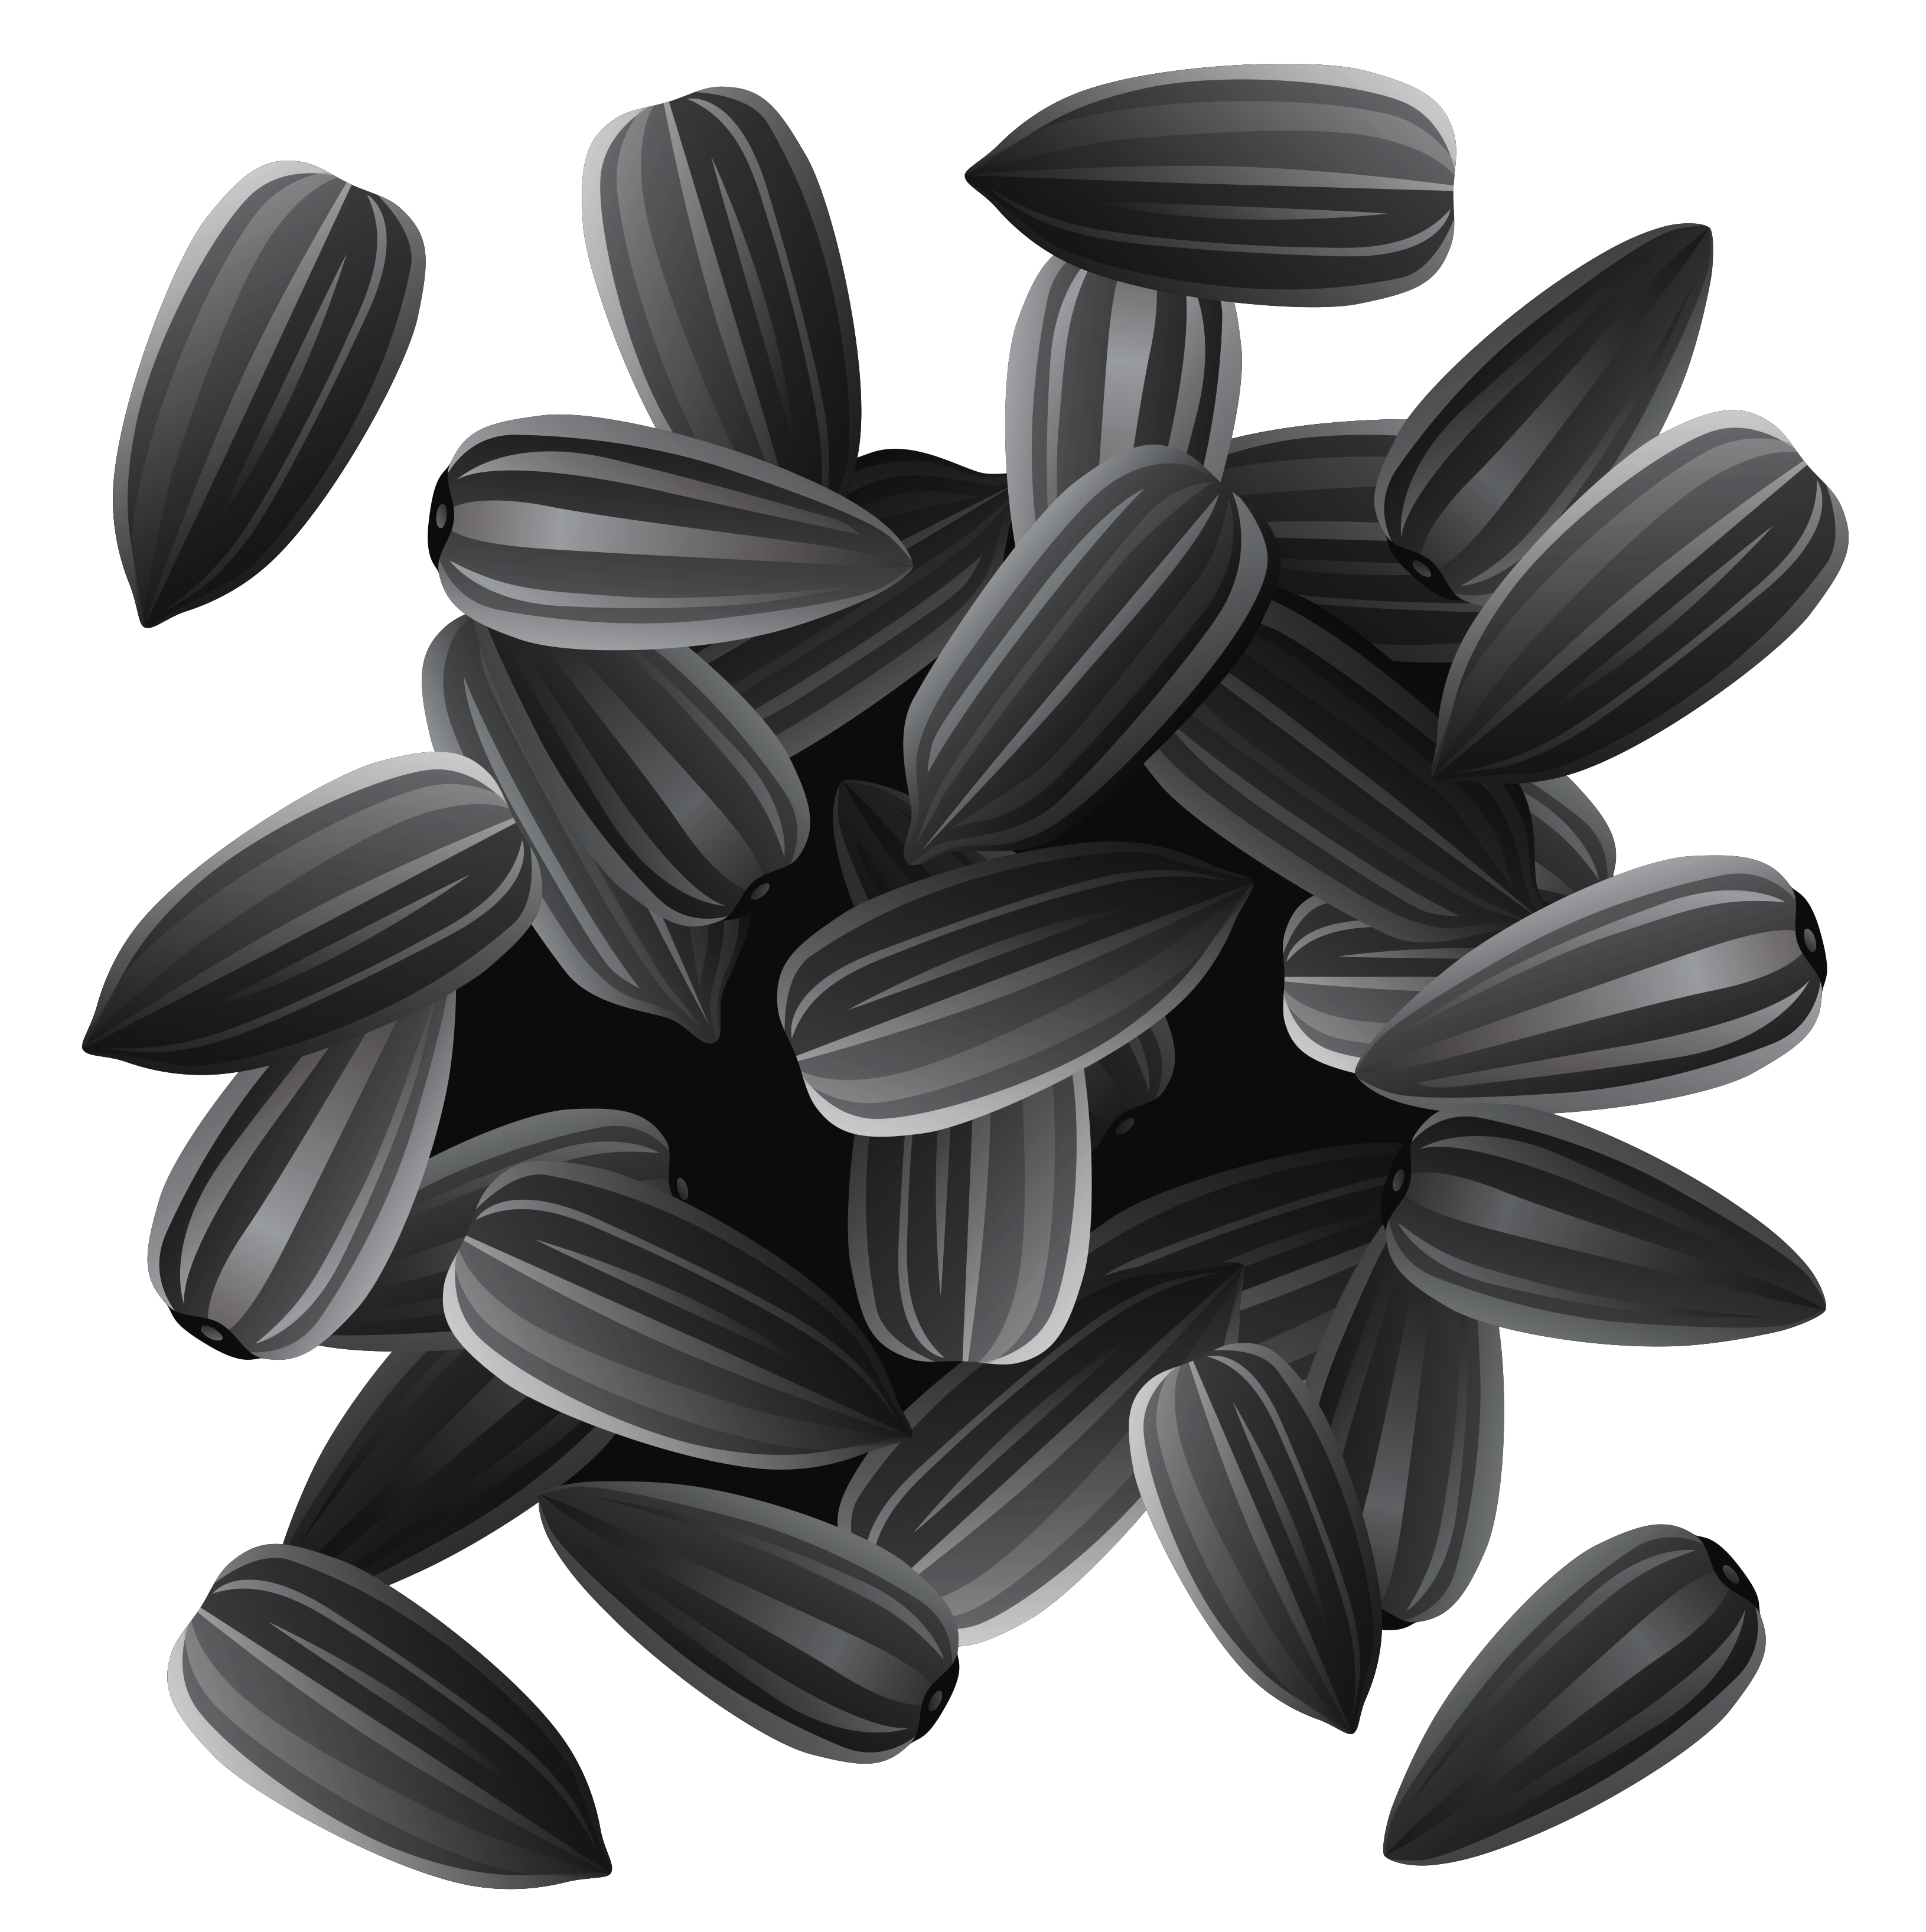 Sunflower seeds clipart 20 free Cliparts | Download images on